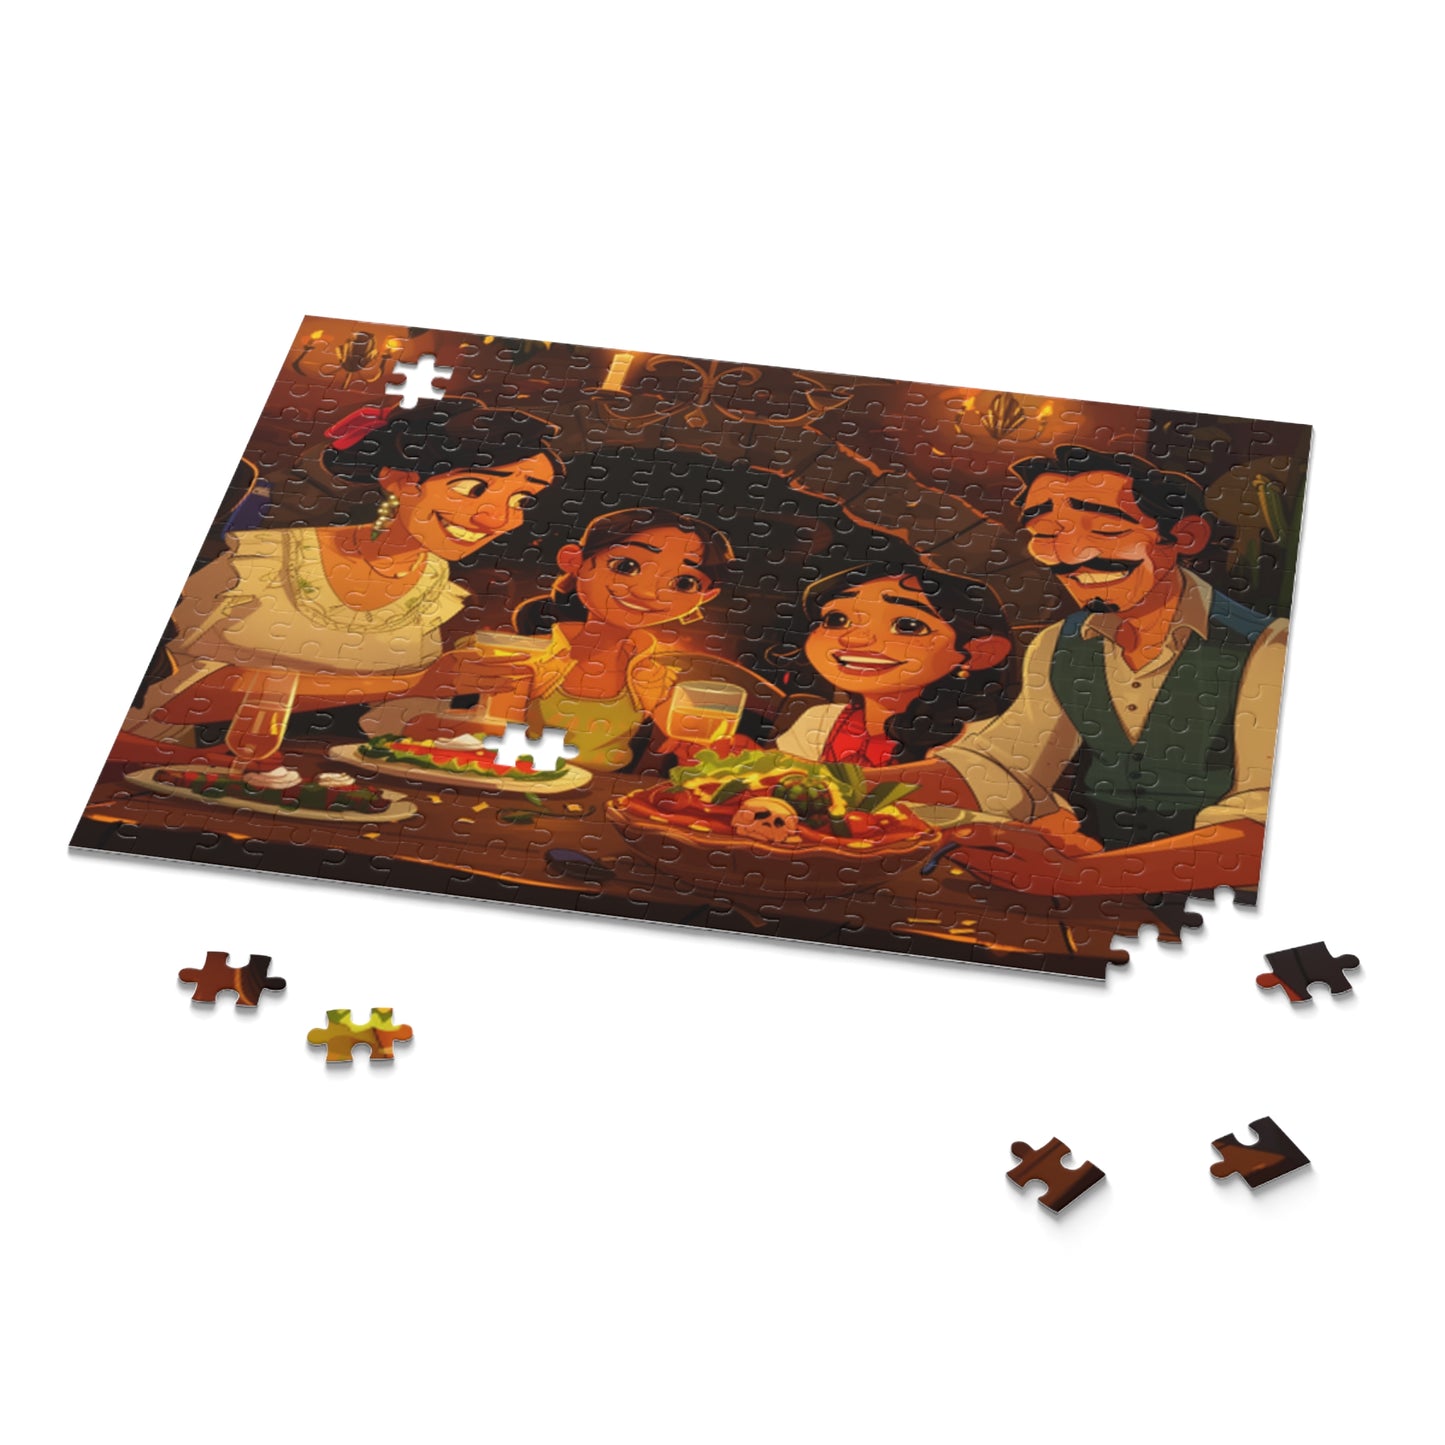 Mexican Lovely Family Dinner Retro Art Jigsaw Puzzle Adult Birthday Business Jigsaw Puzzle Gift for Him Funny Humorous Indoor Outdoor Game Gift For Her Online-9